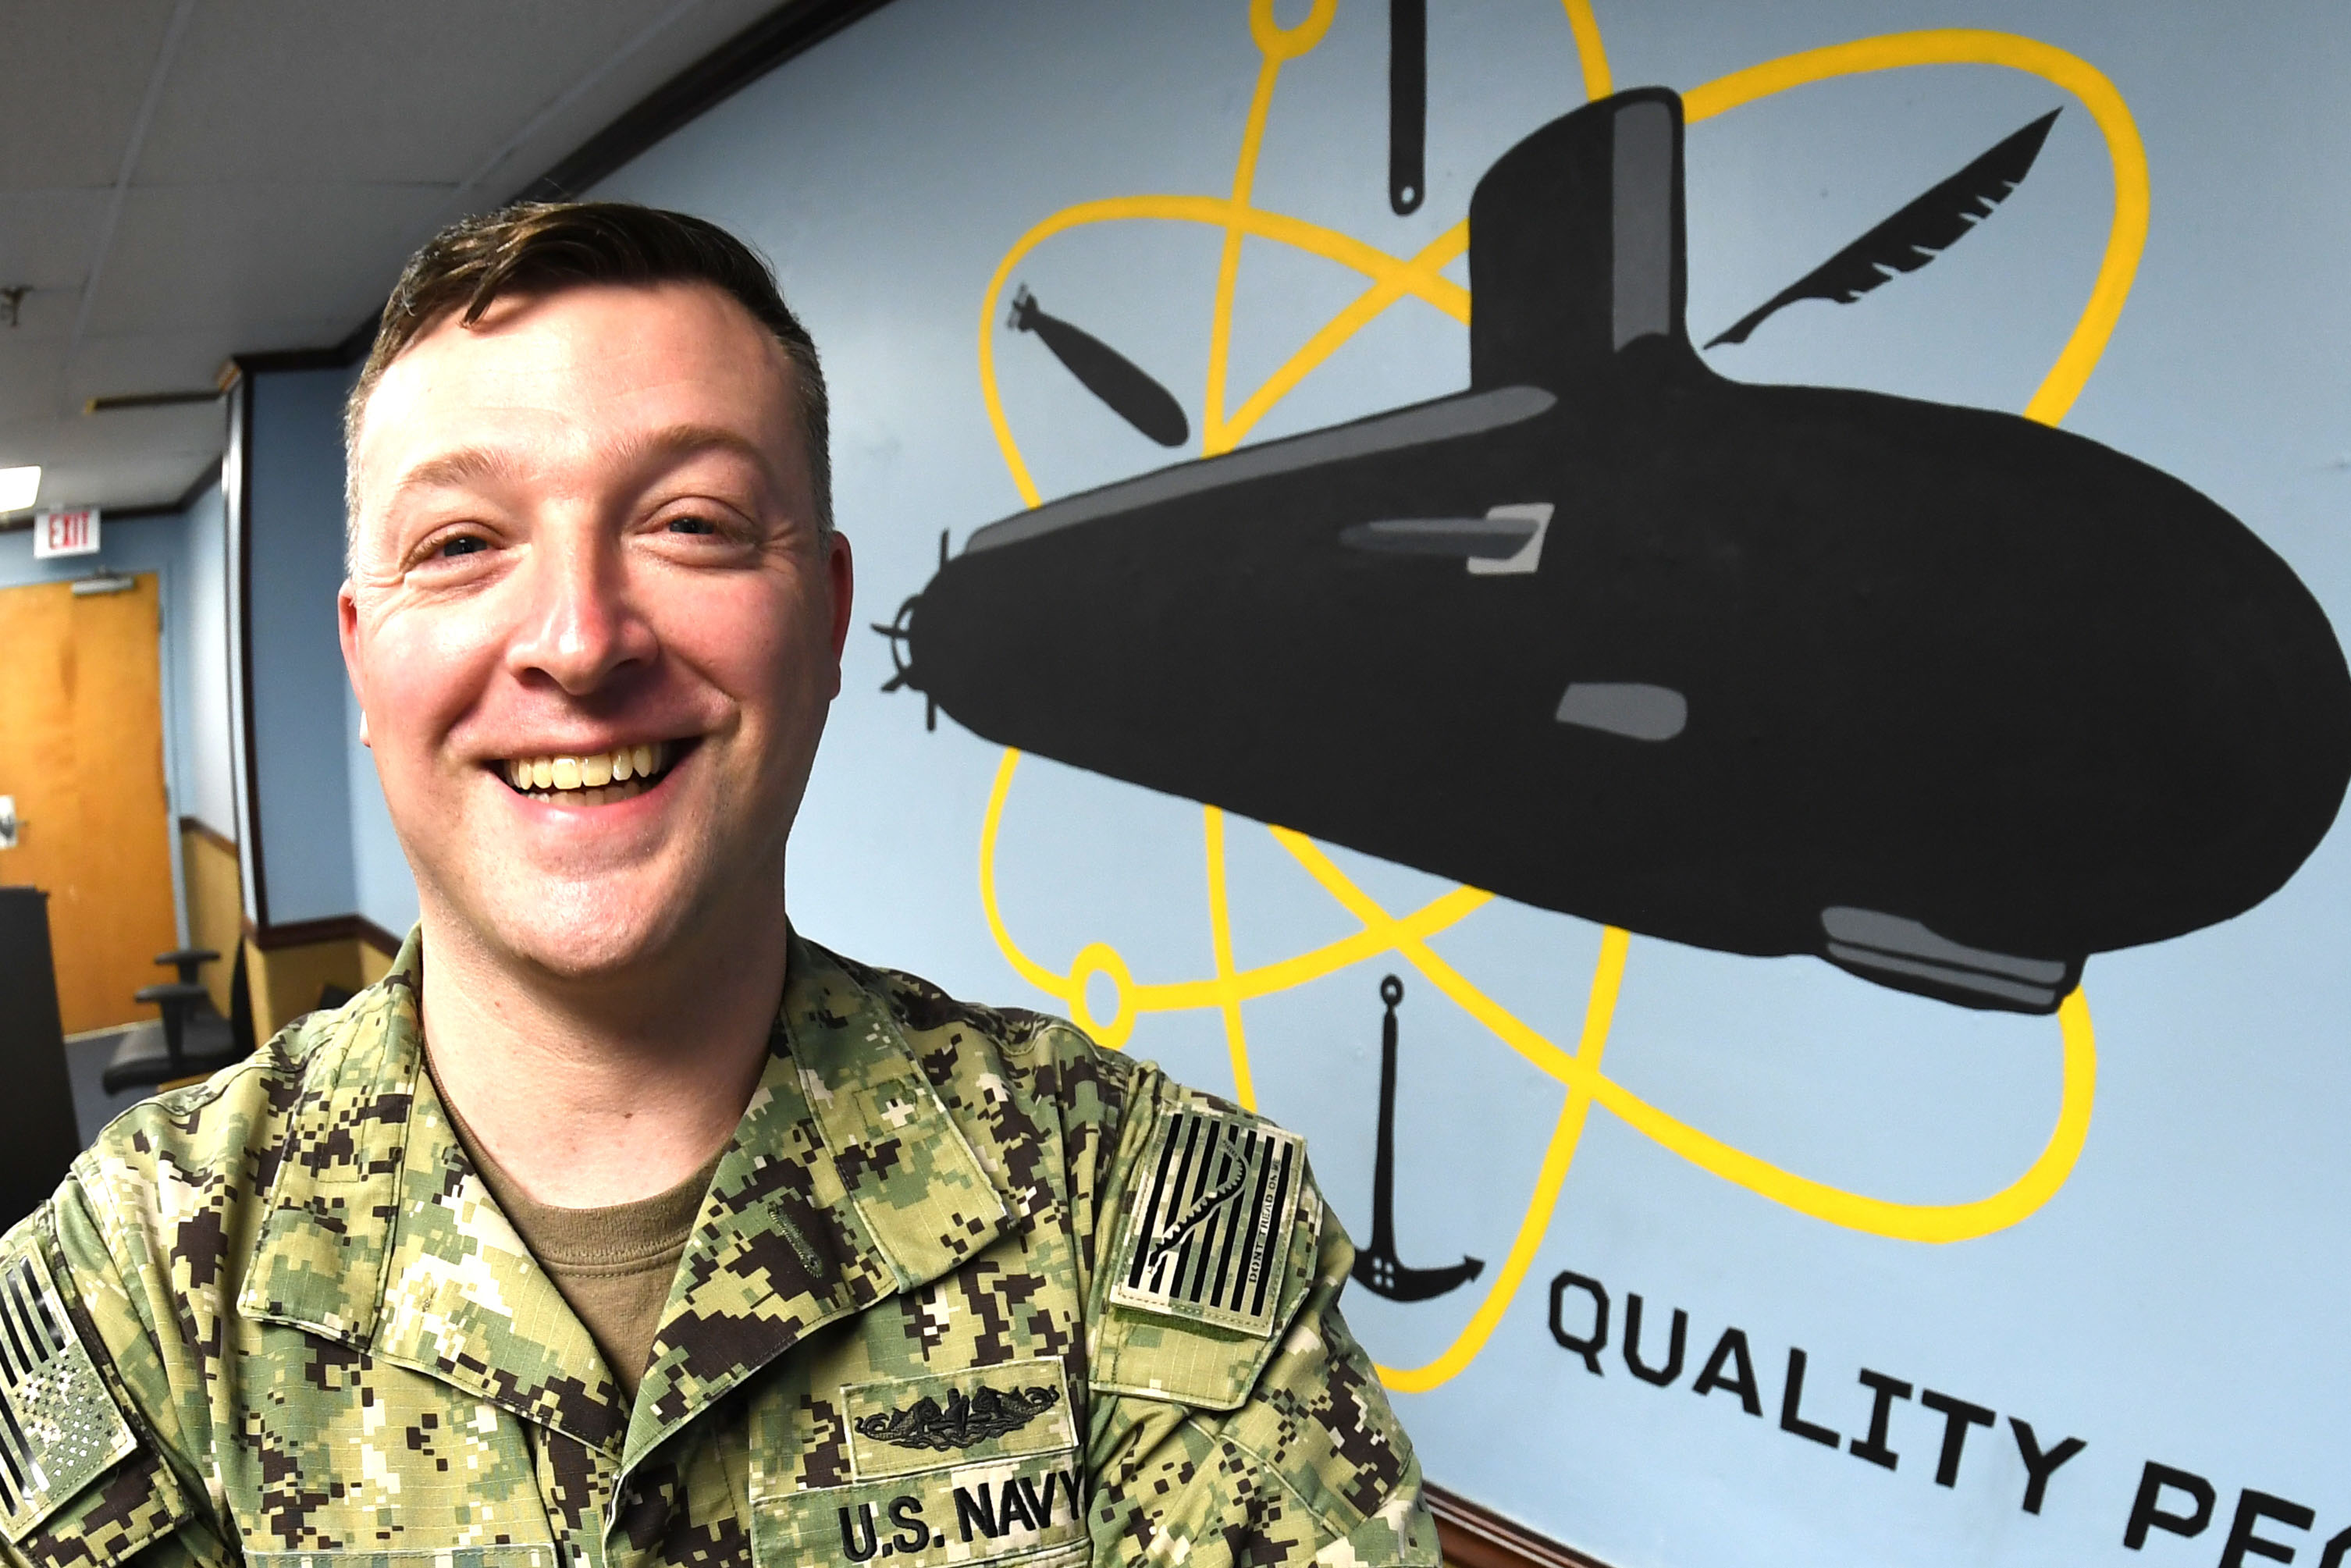 210224-N-GR655-013 GROTON, Conn. (February 24, 2021) – Petty Officer 1st Class Jamie Pearson, a Machinist’s Mate (Auxiliary) assigned to Naval Submarine Support Facility New London, stands in front of a mural he painted for his command’s conference room. Pearson has been moonlighting as an artist on and off base in the Groton community since 2014. (U.S. Navy photo by Chief Petty Officer Joshua Karsten/RELEASED)